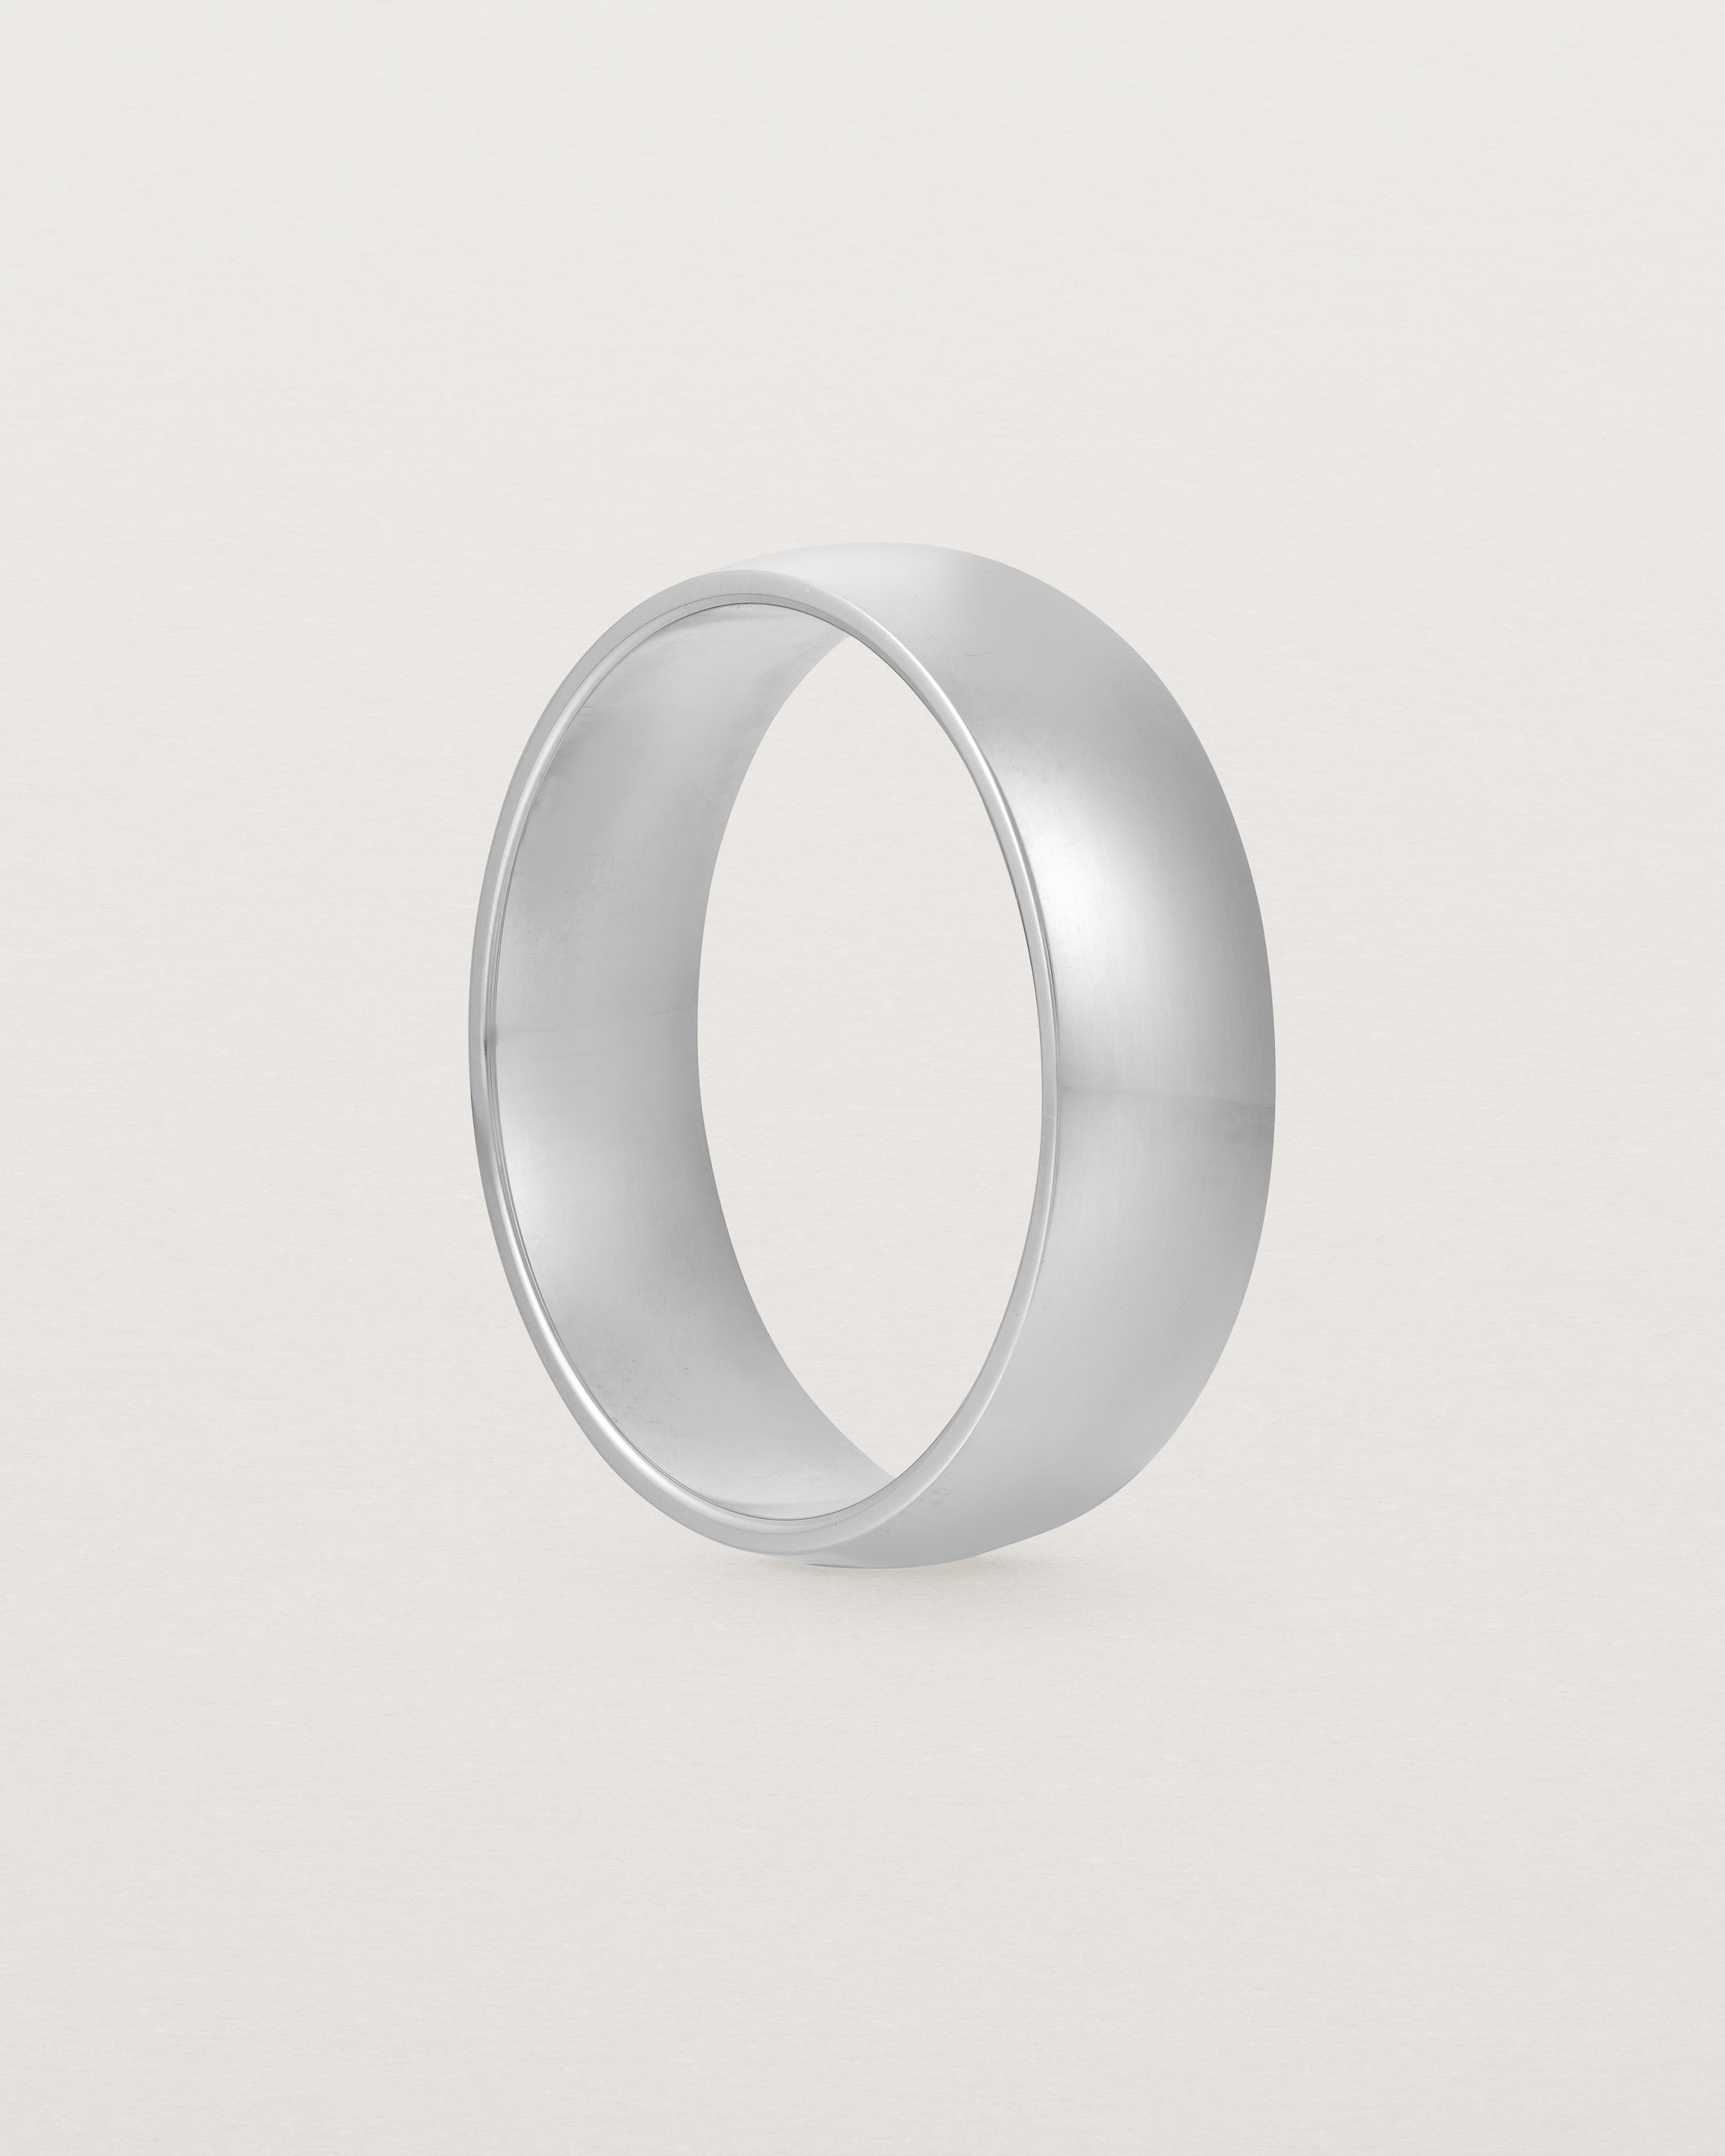 The front view of a heavy 6mm wedding band in white gold